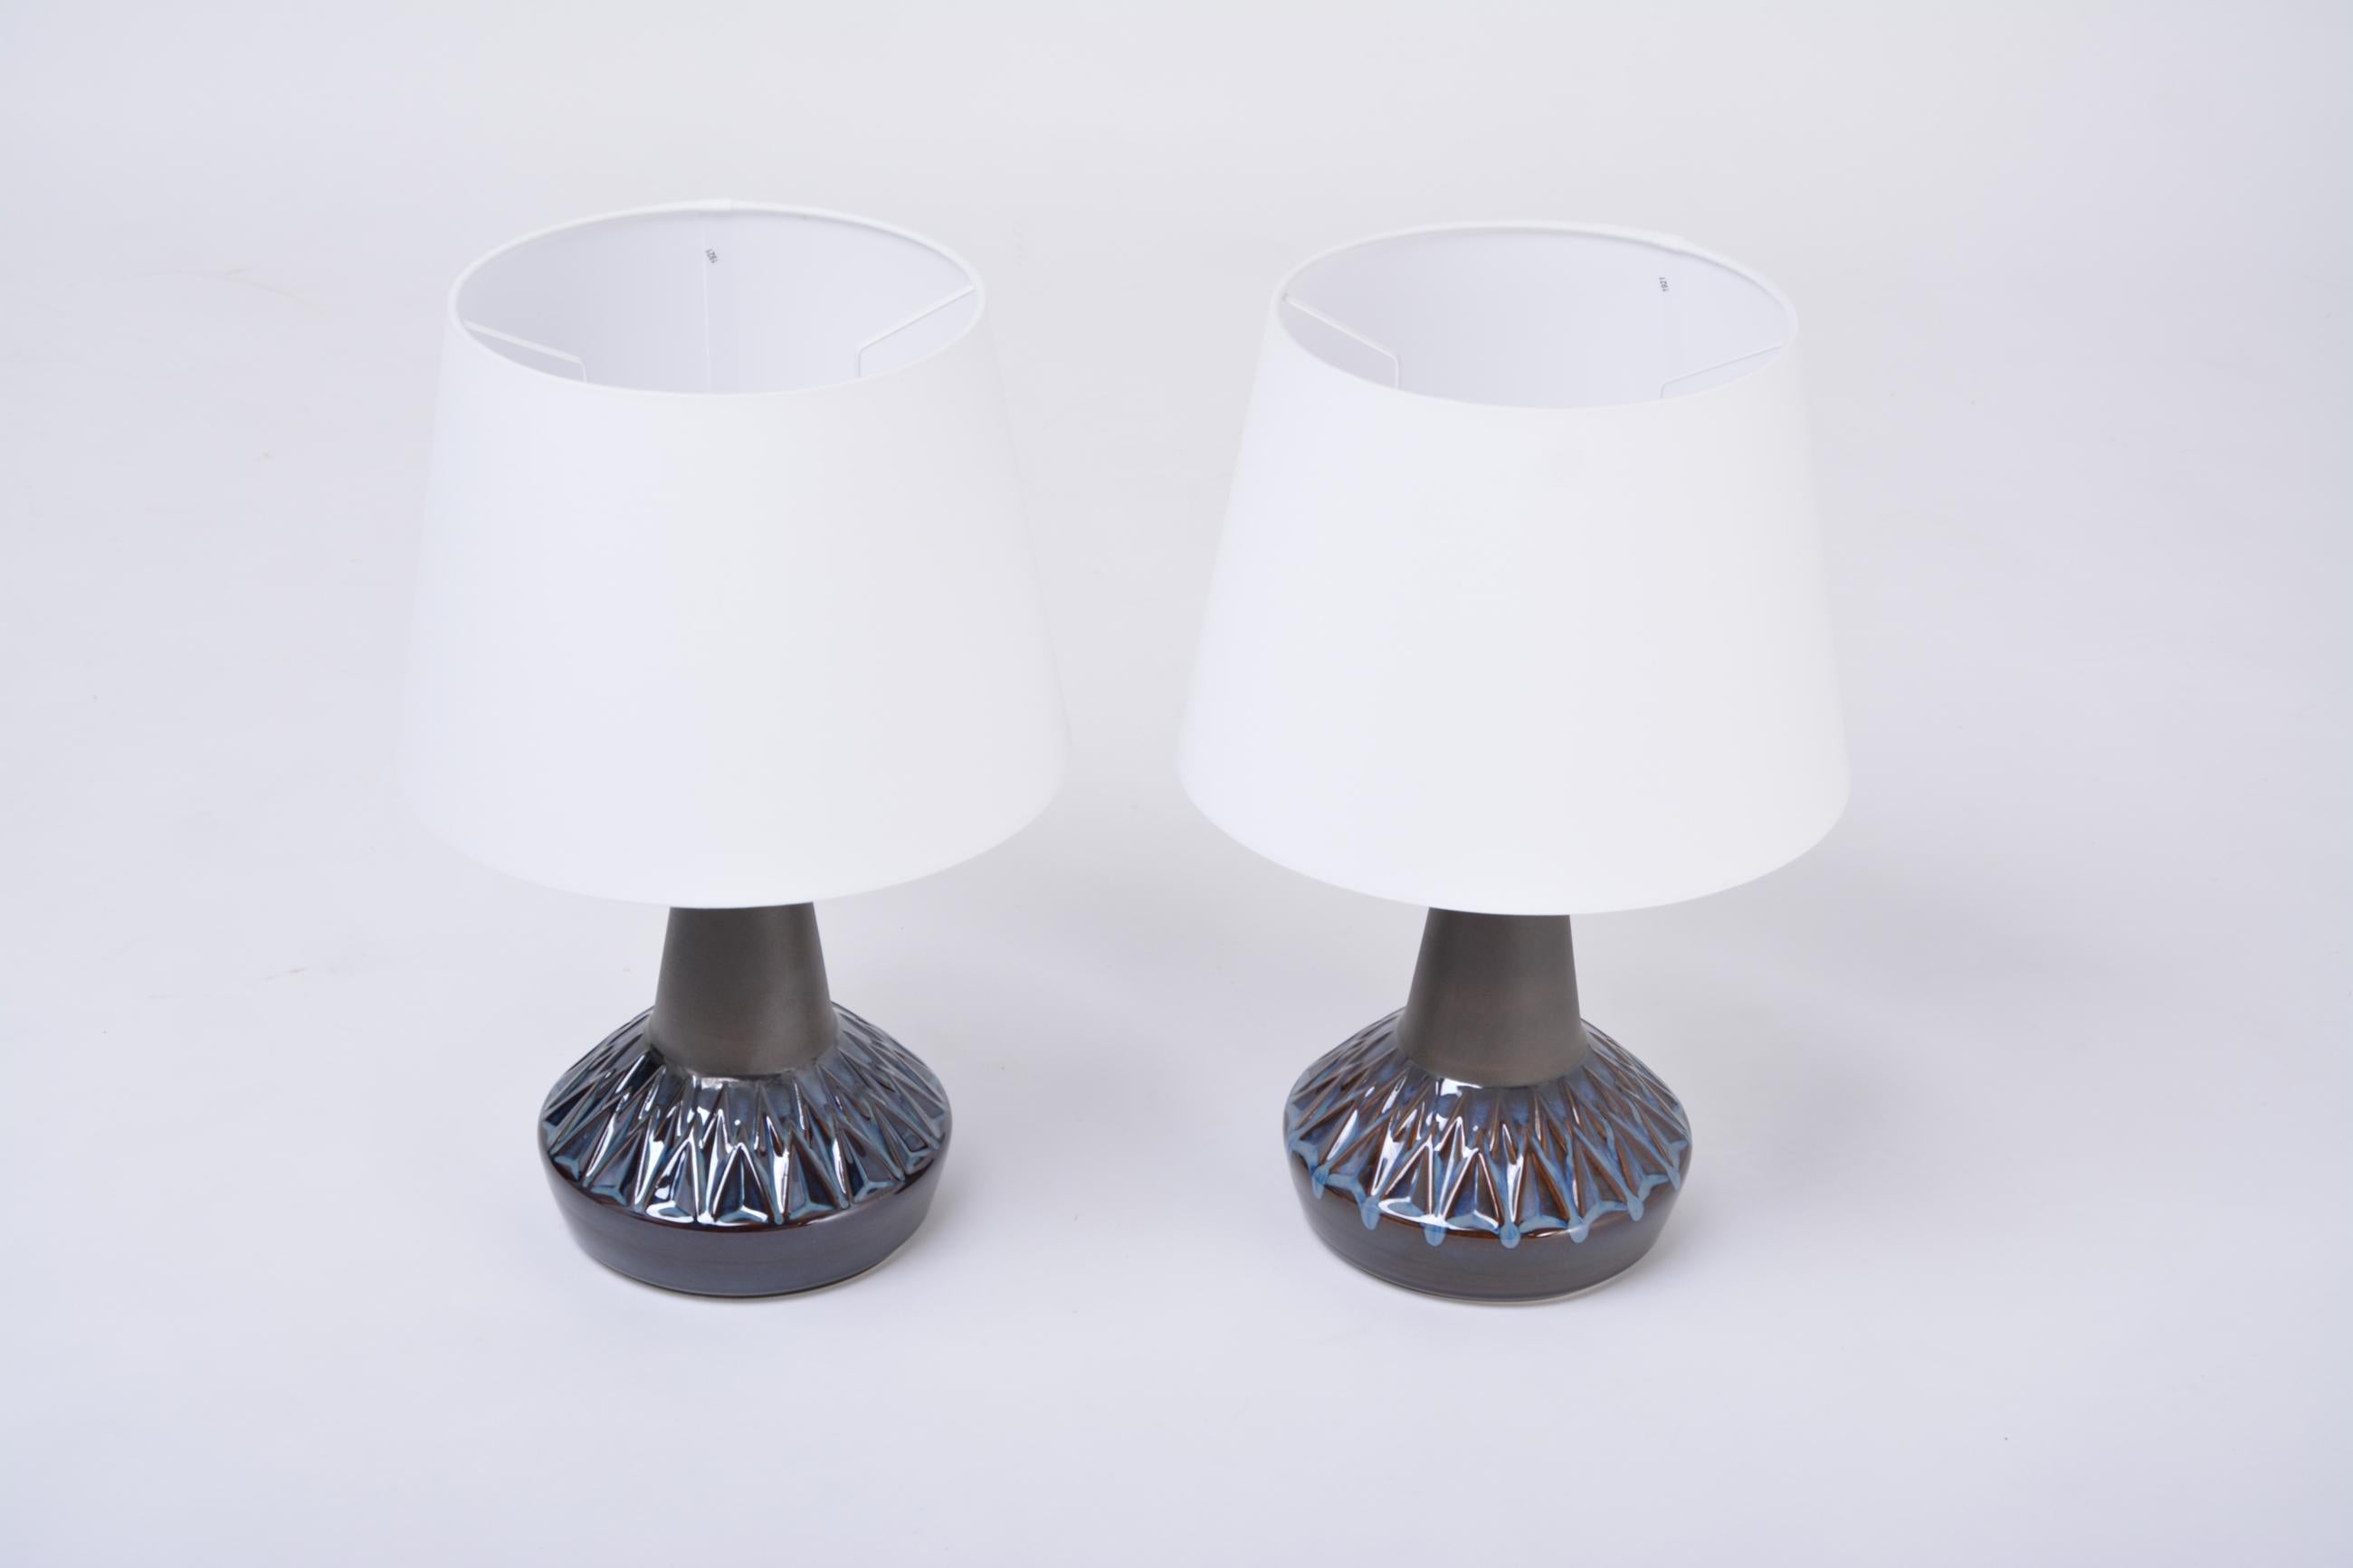 Pair of Blue Danish Mid-Century Modern table lamps by Einar Johansen for Soholm

Gorgeous pair of Danish table lamps designed by Einar Johansen and produced by Soholm Stentoj on the island of Bornholm. The lamps feature a beautiful incised